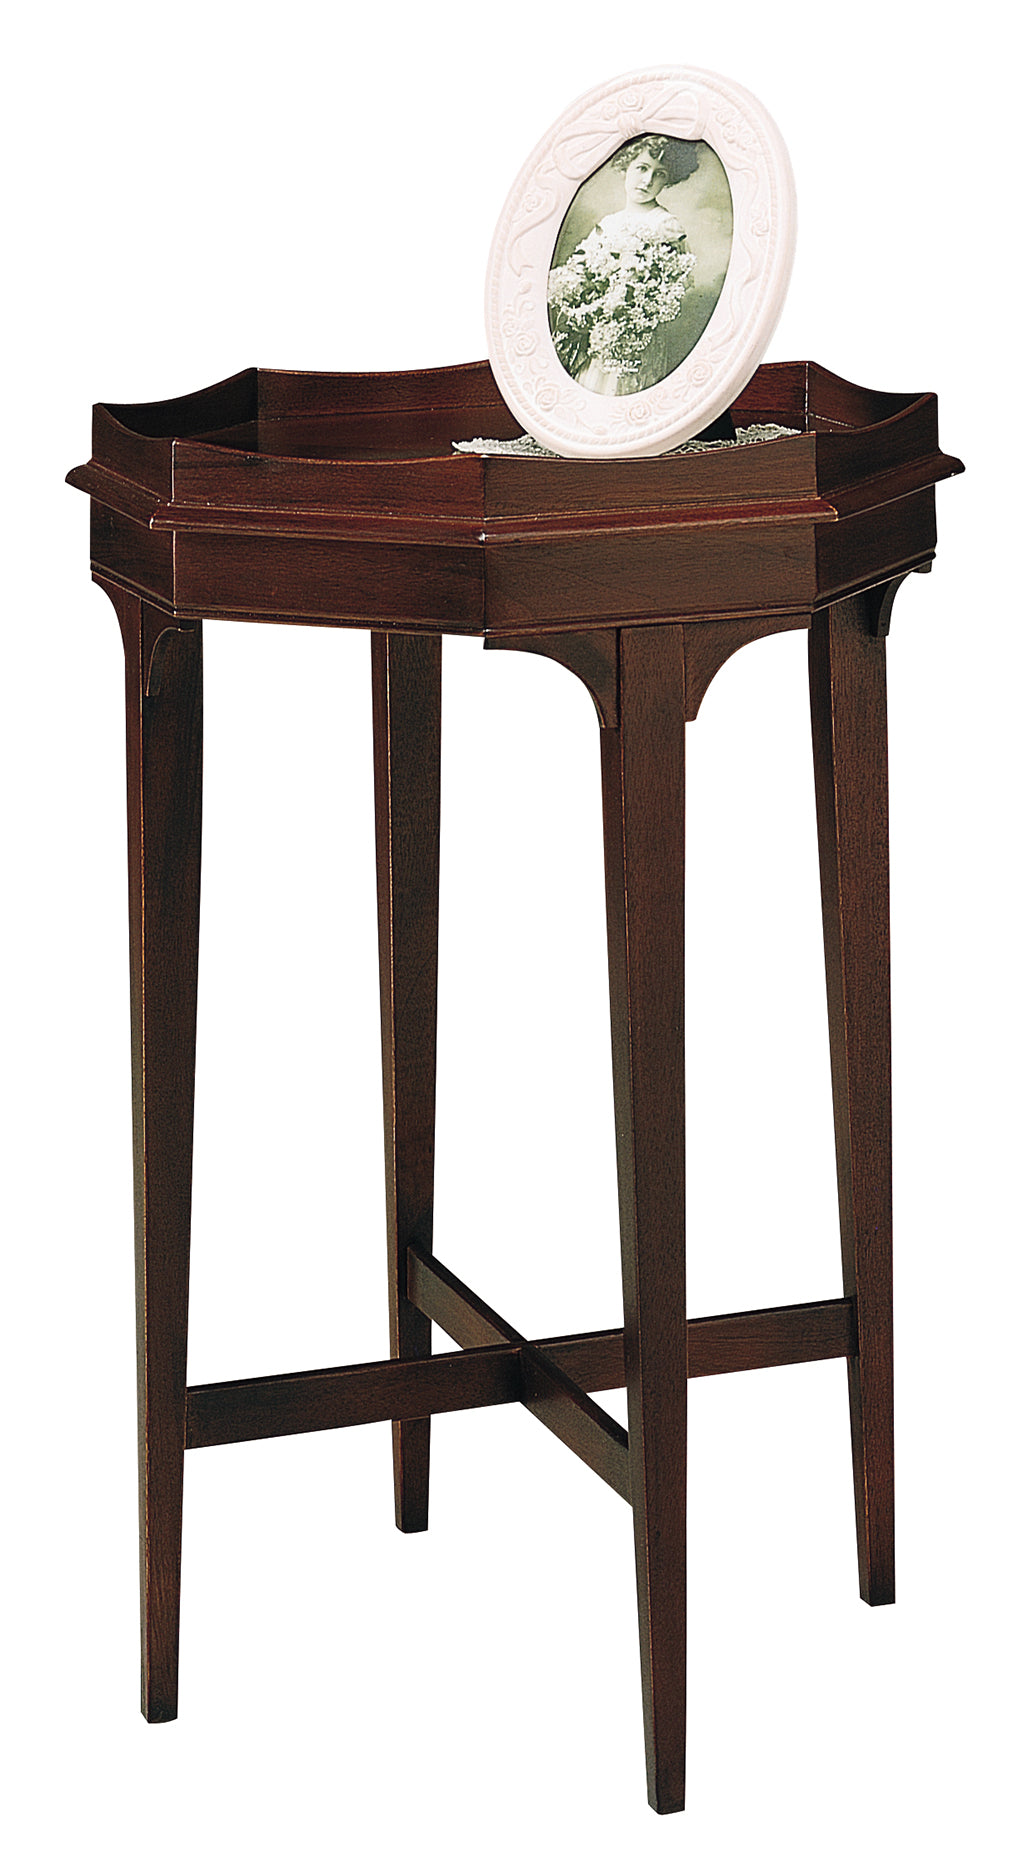 Hekman 560090094 Accents 18.25in. x 18.25in. x 27in. End Table